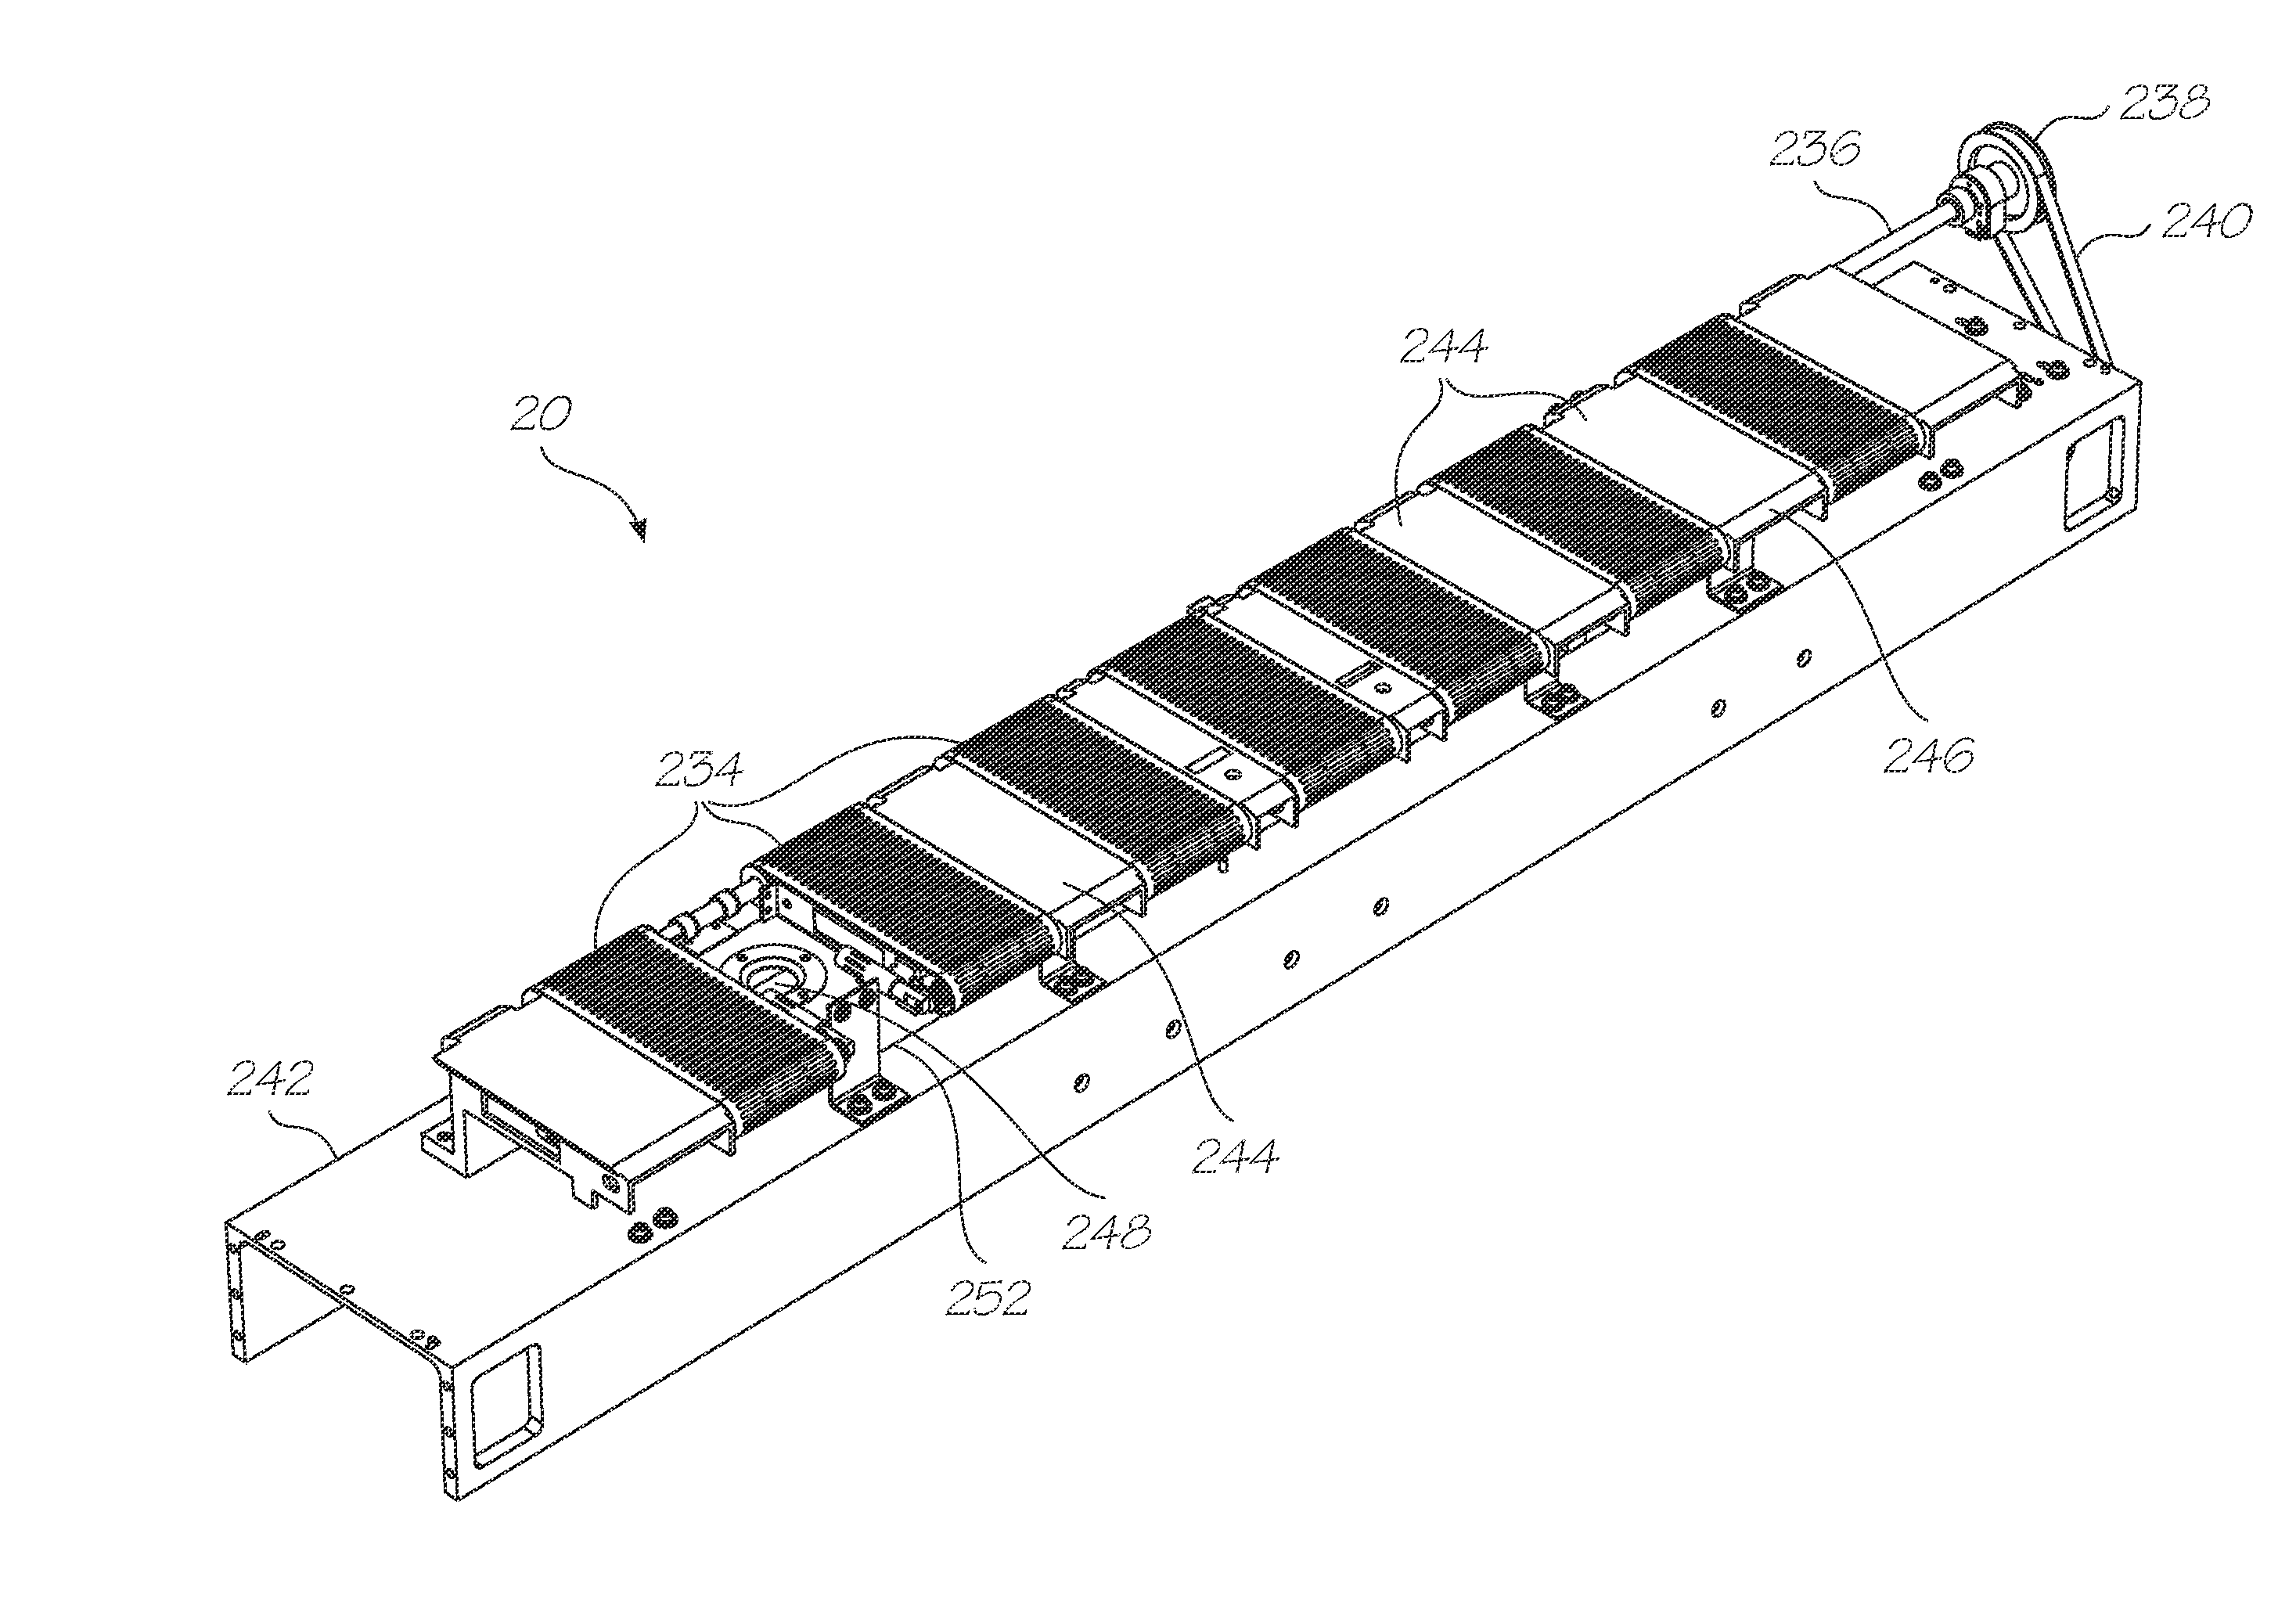 Printing system with input media roller and output vacuum belts